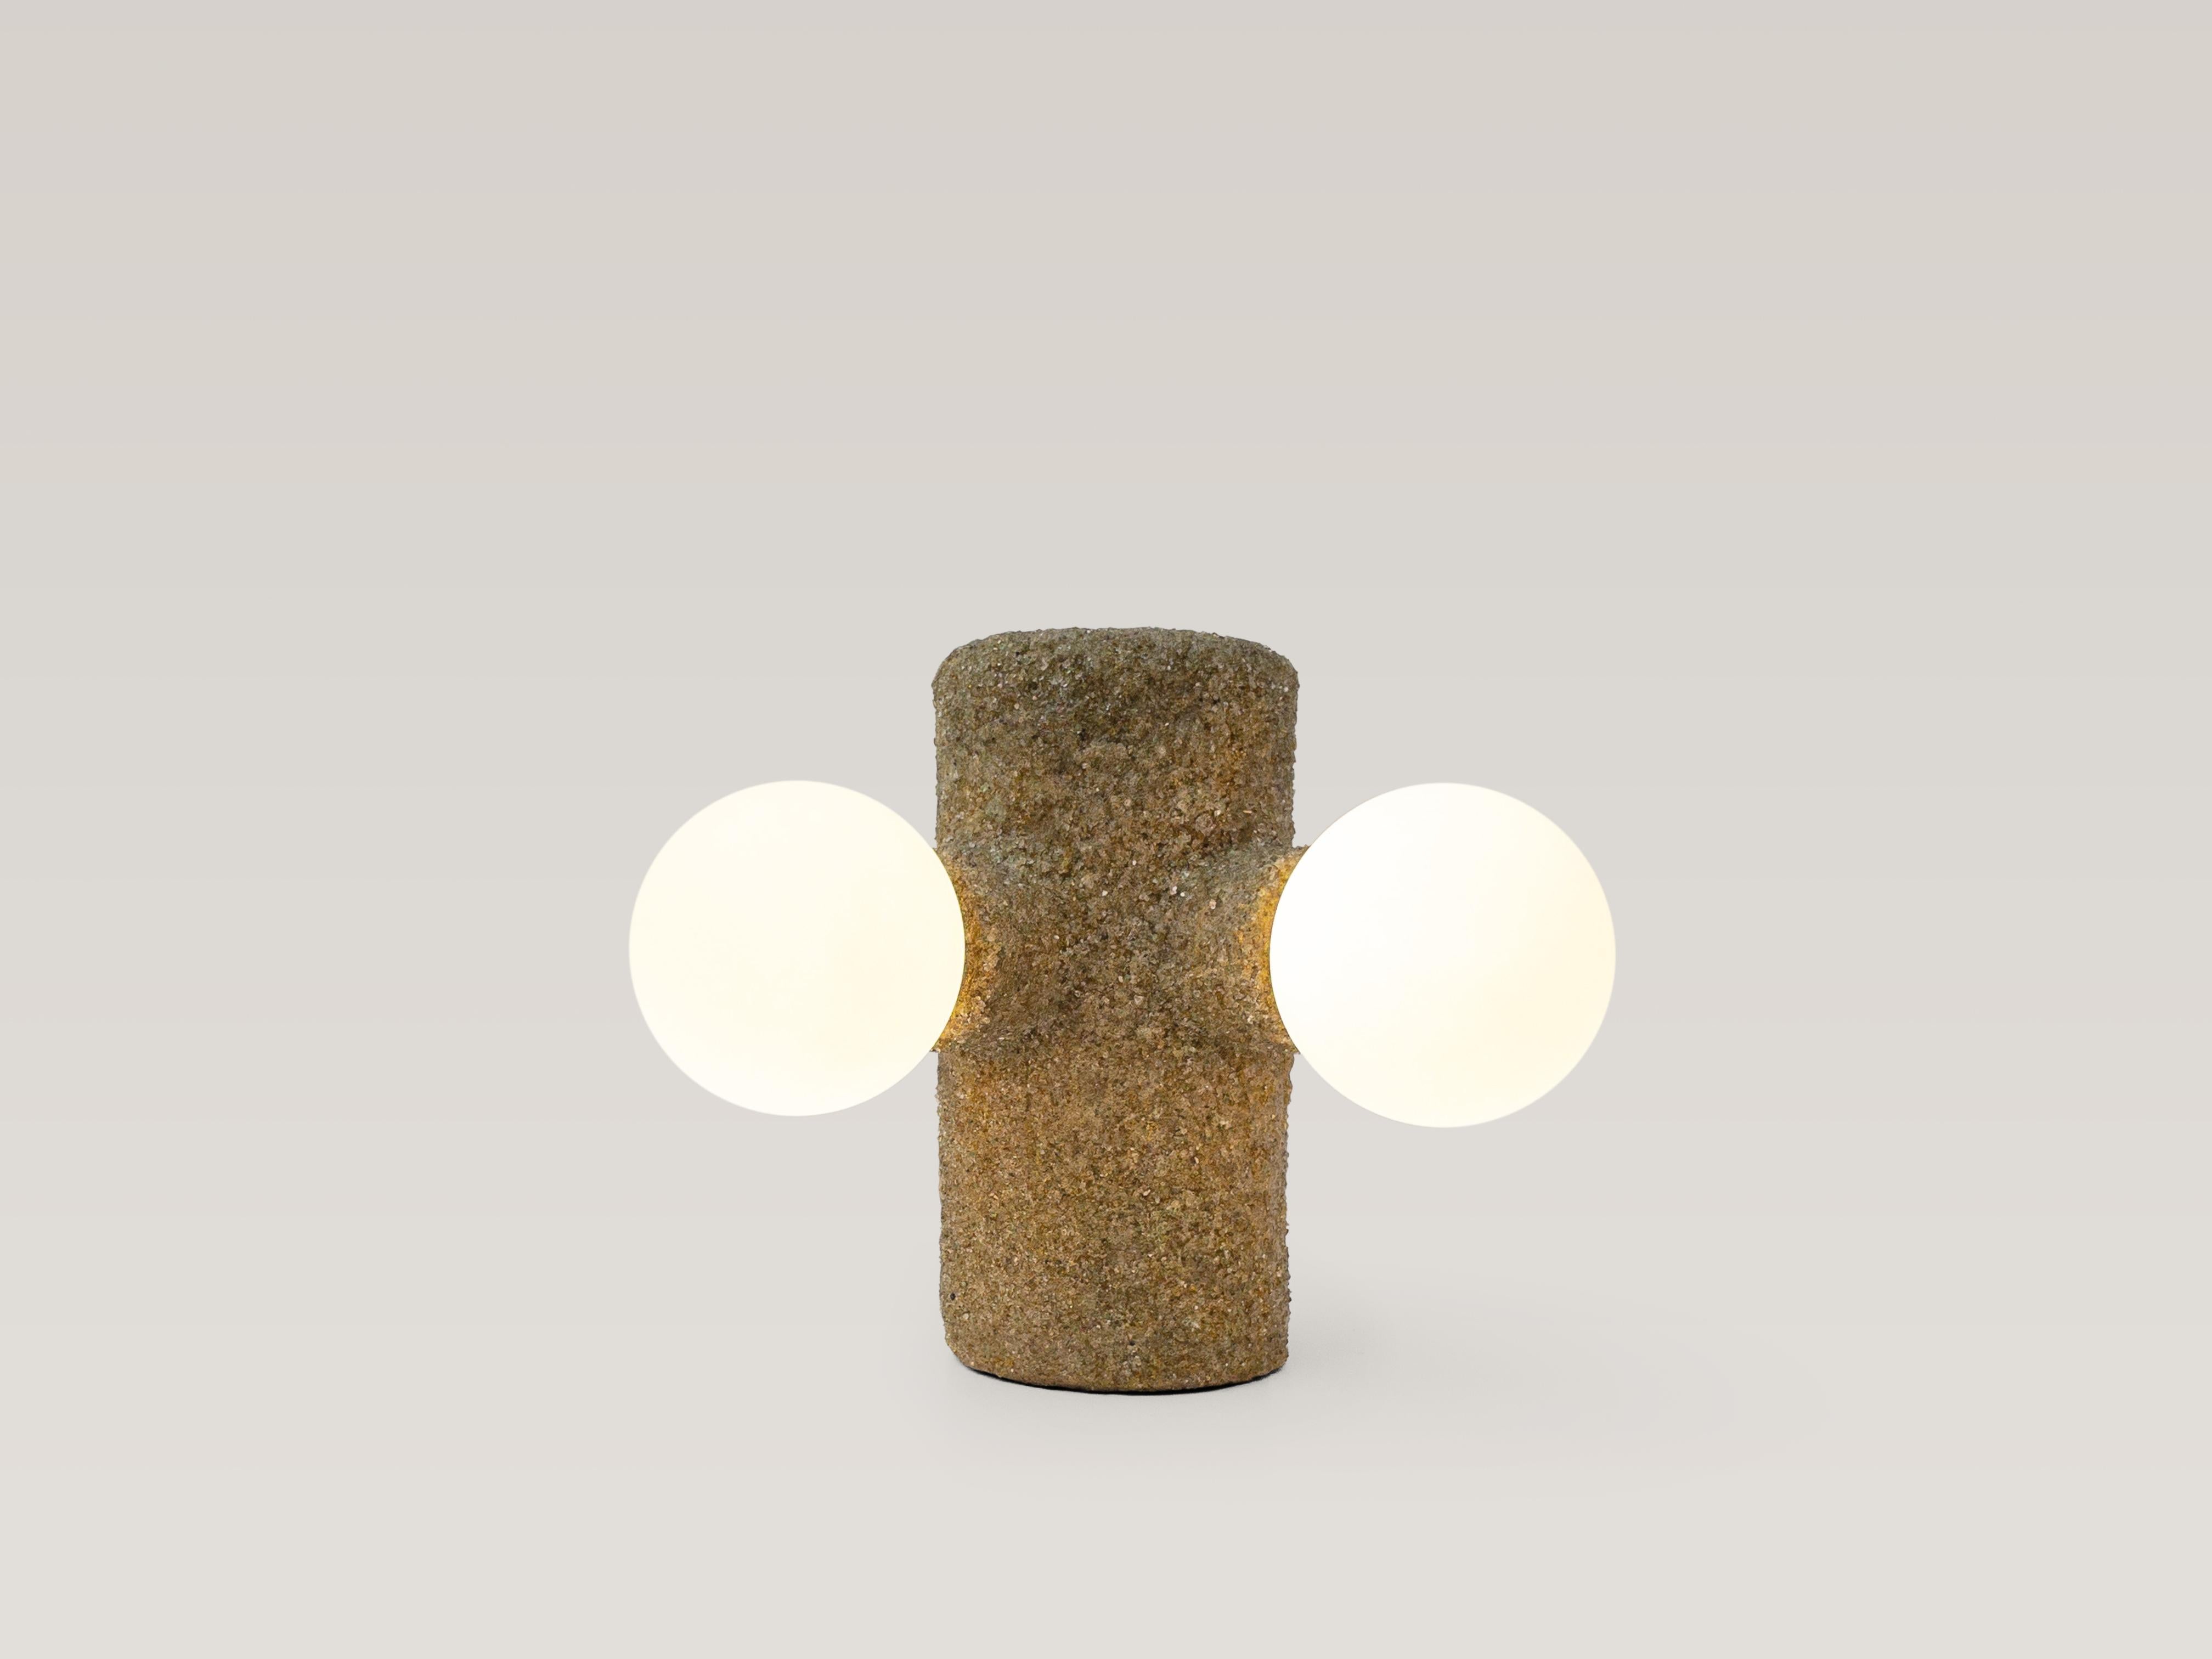 British Contemporary Dimmable Table Lamp - The Juggler by Nicola Cecutti For Sale